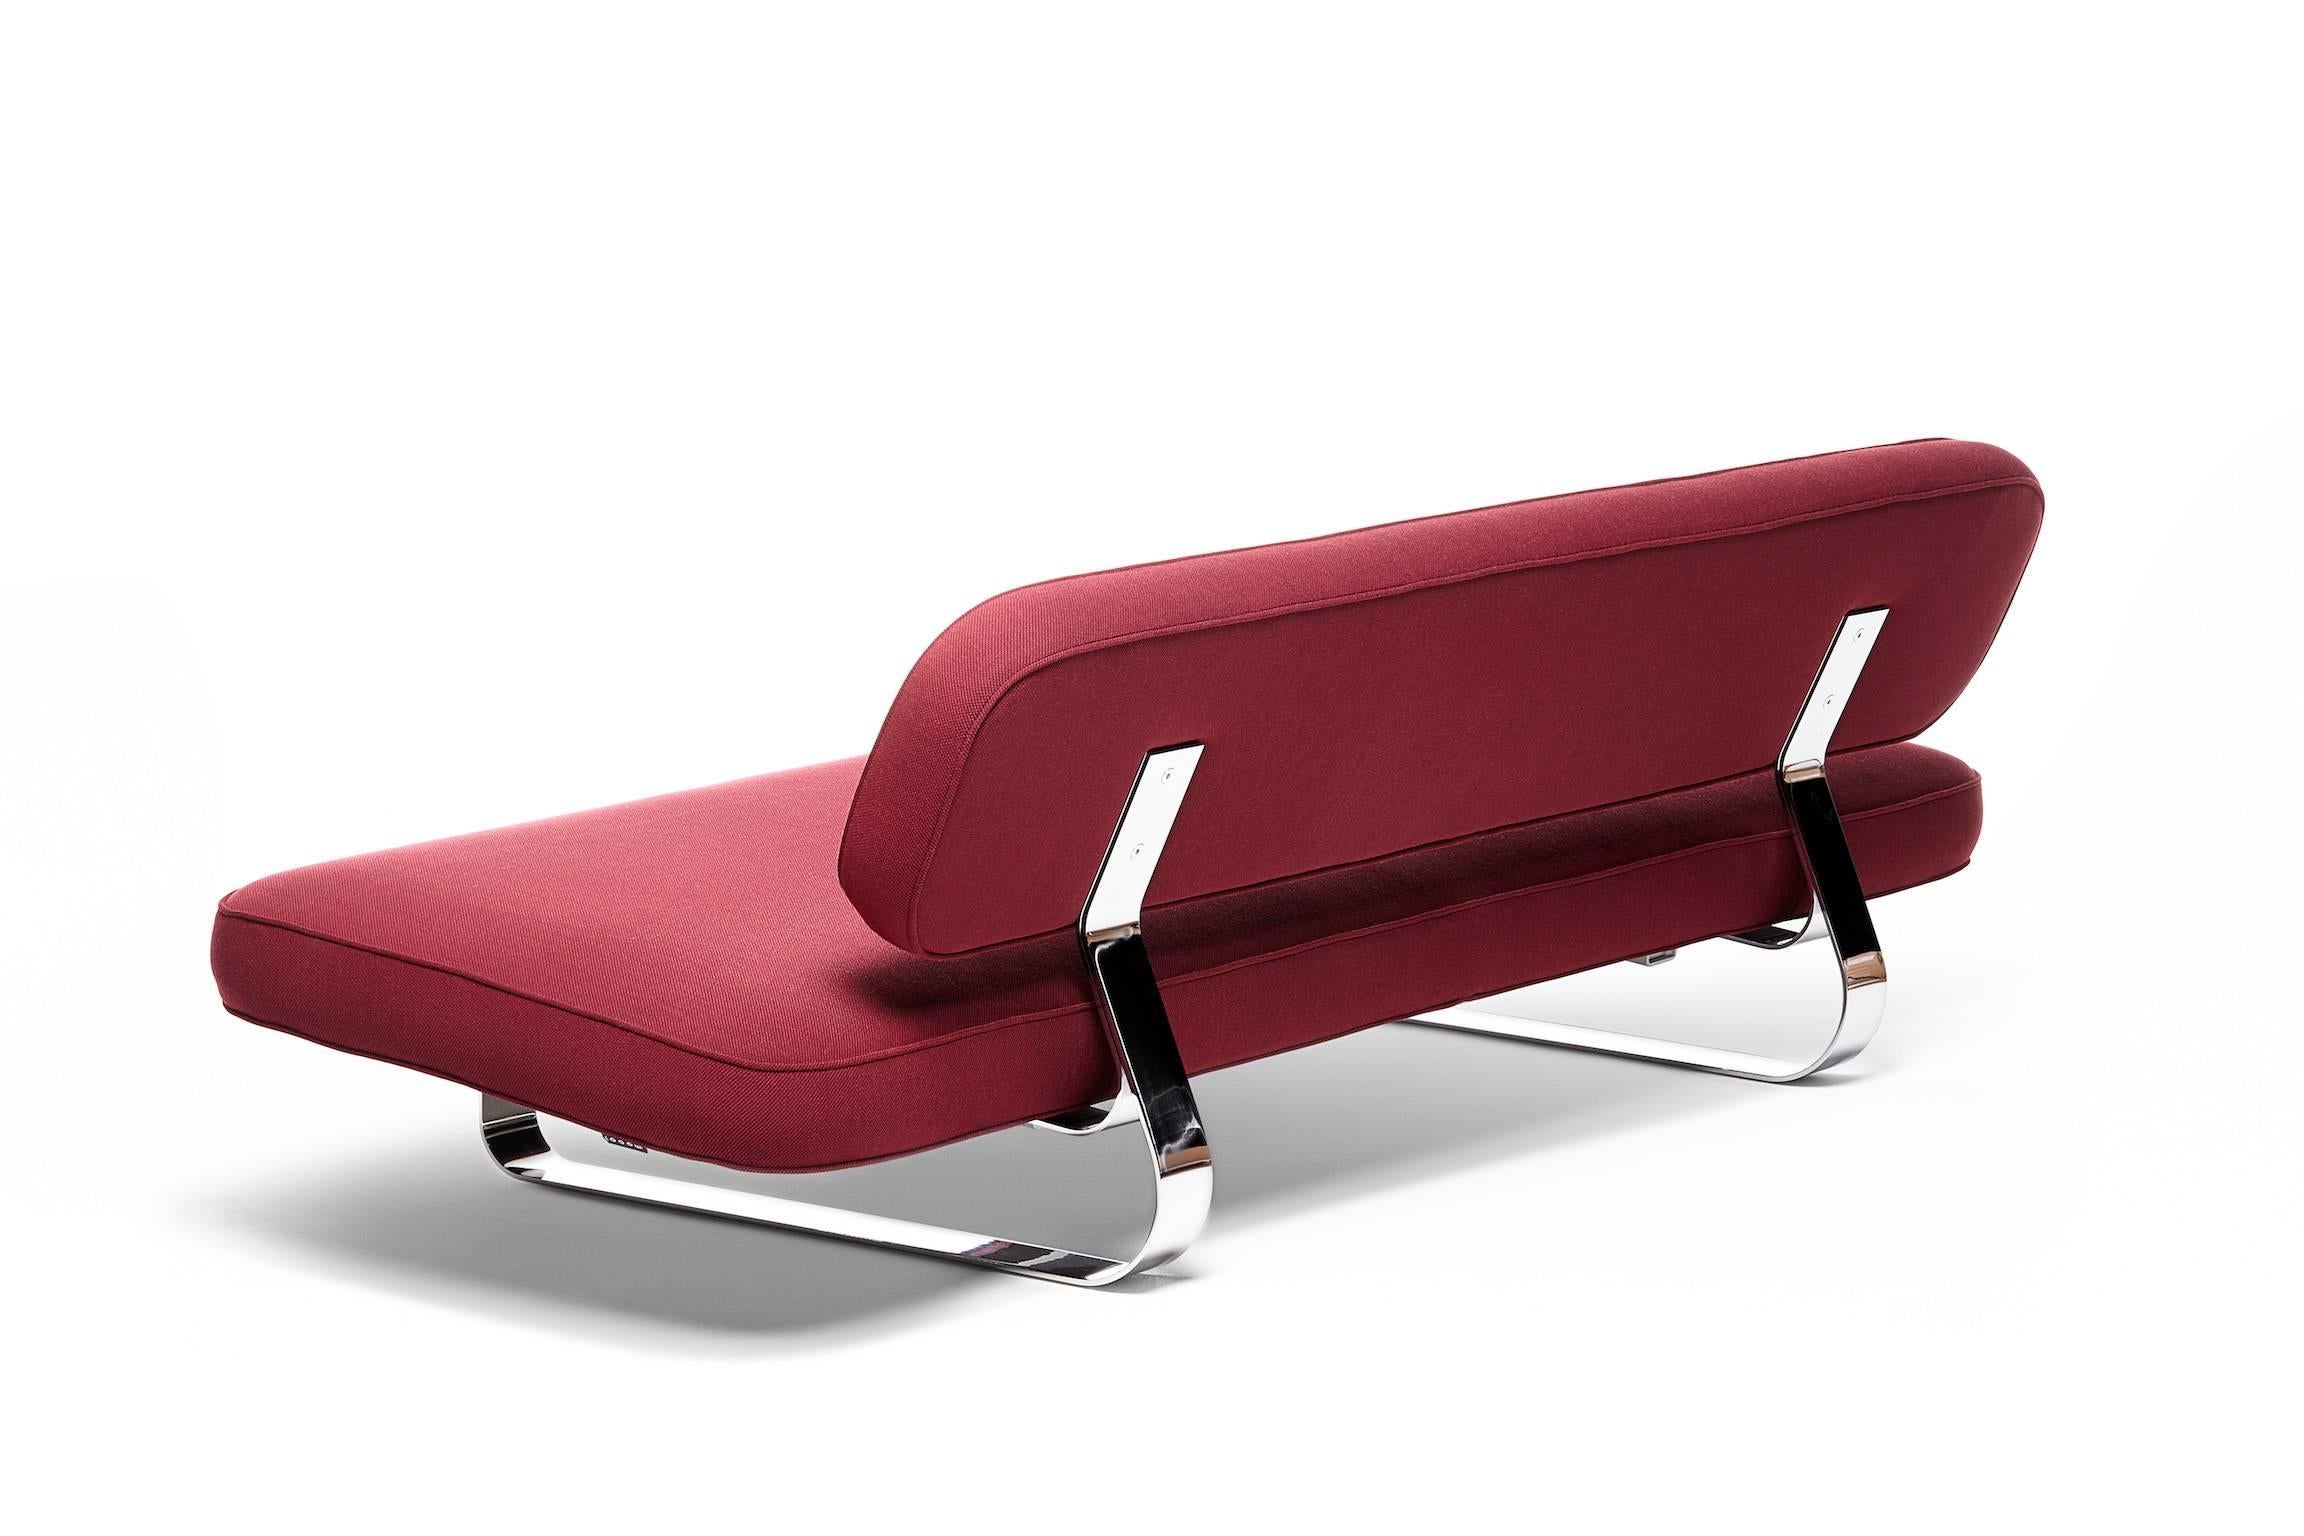 A classy and stylish promotor of comfortable lounging for it encourages the possibility, however unexpected, of enjoying a quick NAP to freshen up. Less space-consuming than a sofa bed and more versatile than a regular sofa, Power NAP can be lifted